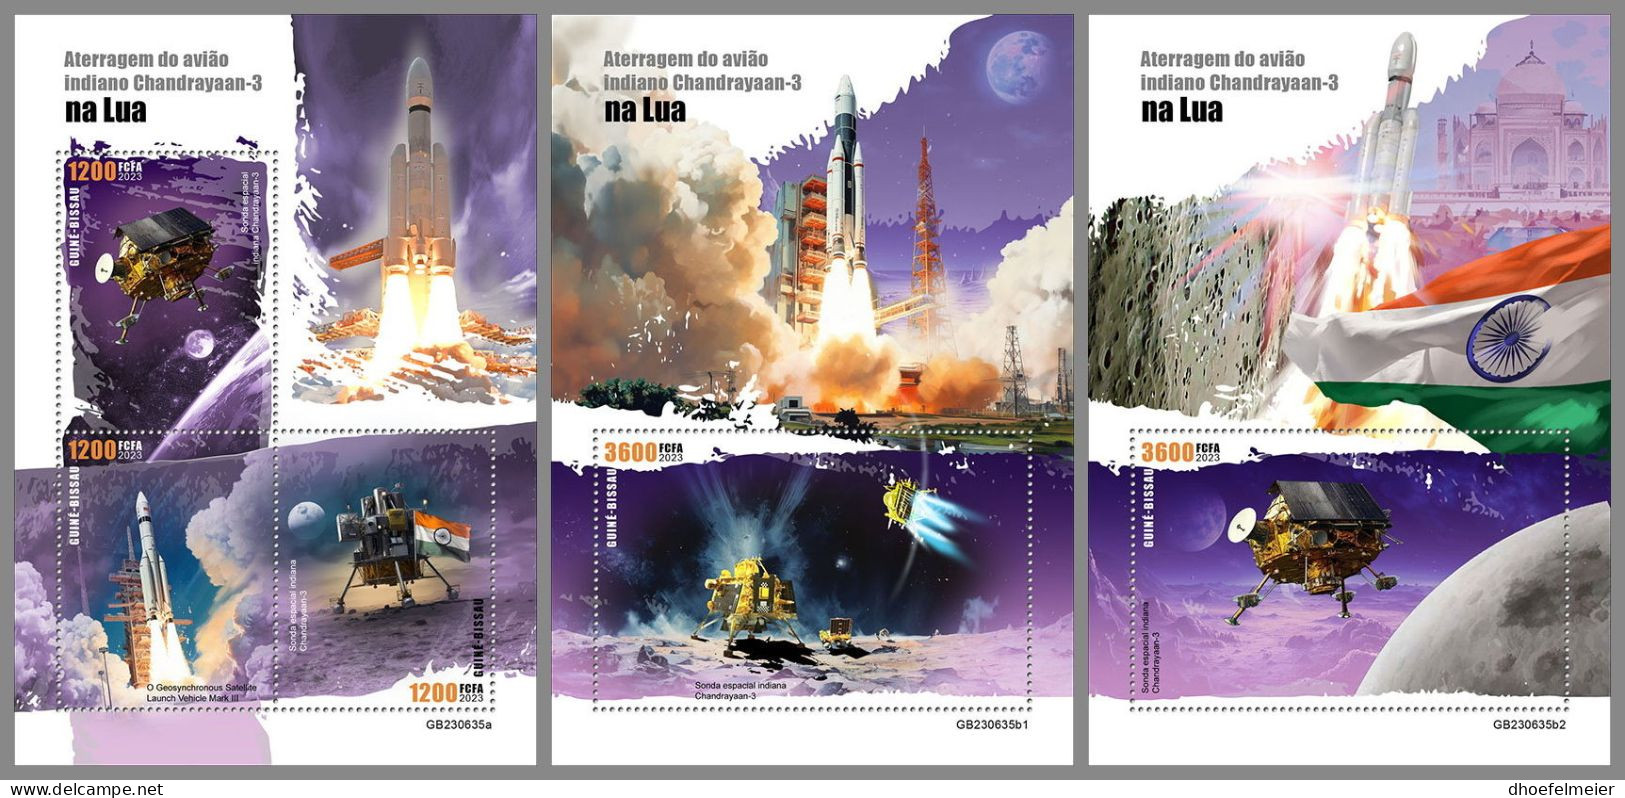 GUINEA-BISSAU 2023 MNH Indian Chandrayaan-3 Space Raumfahrt M/S+2S/S – OFFICIAL ISSUE – DHQ2420 - Afrique